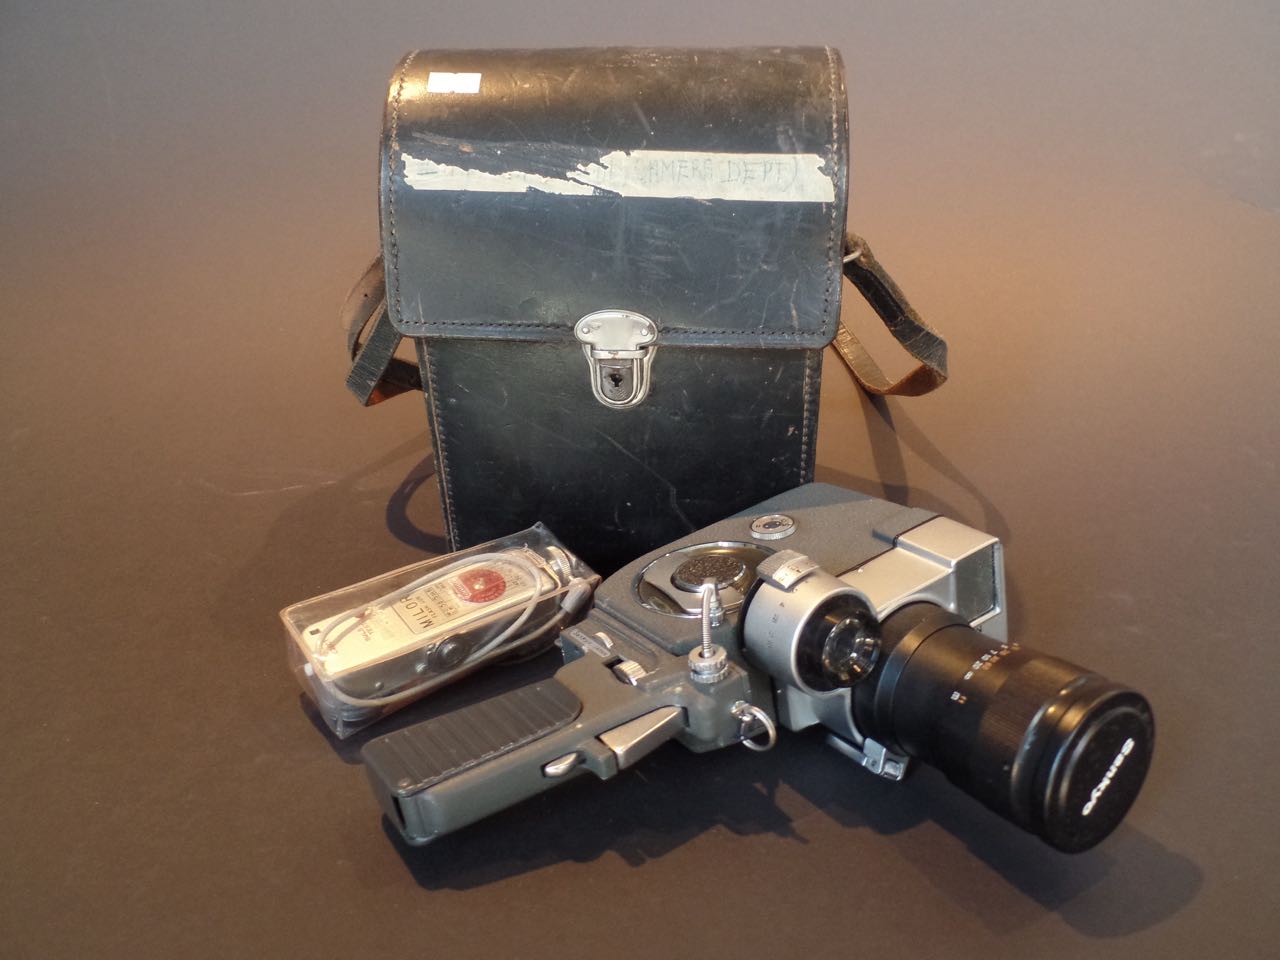 Sankyo Zoom 8 Cine Camera With accessories, serial number 61720, in leather carrying case.